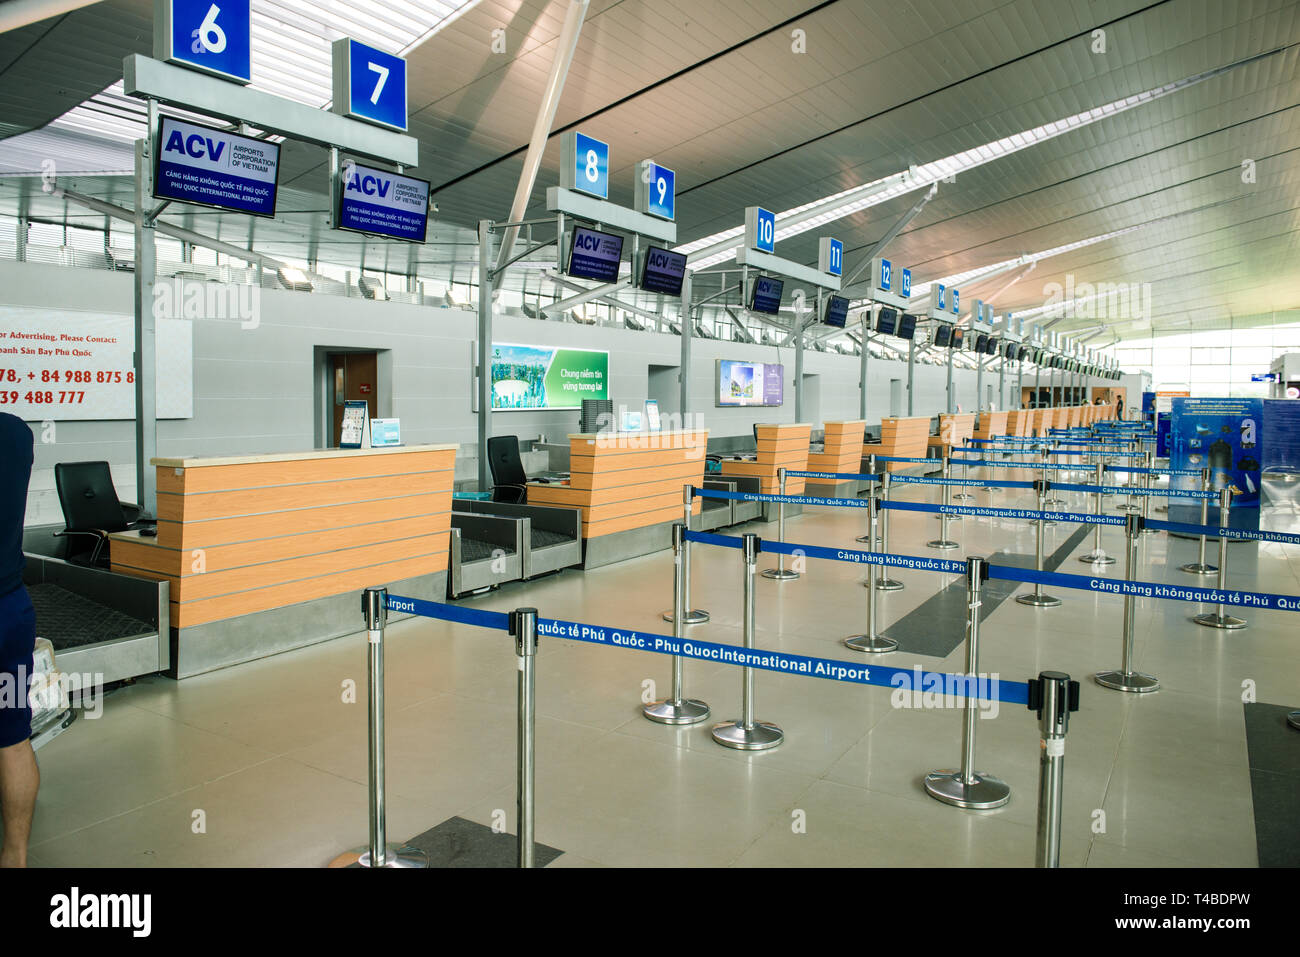 PHU QUOC, VIETNAM JUNE 28, 2017: The public check-in area of an airport with crowd control barriers Stock Photo